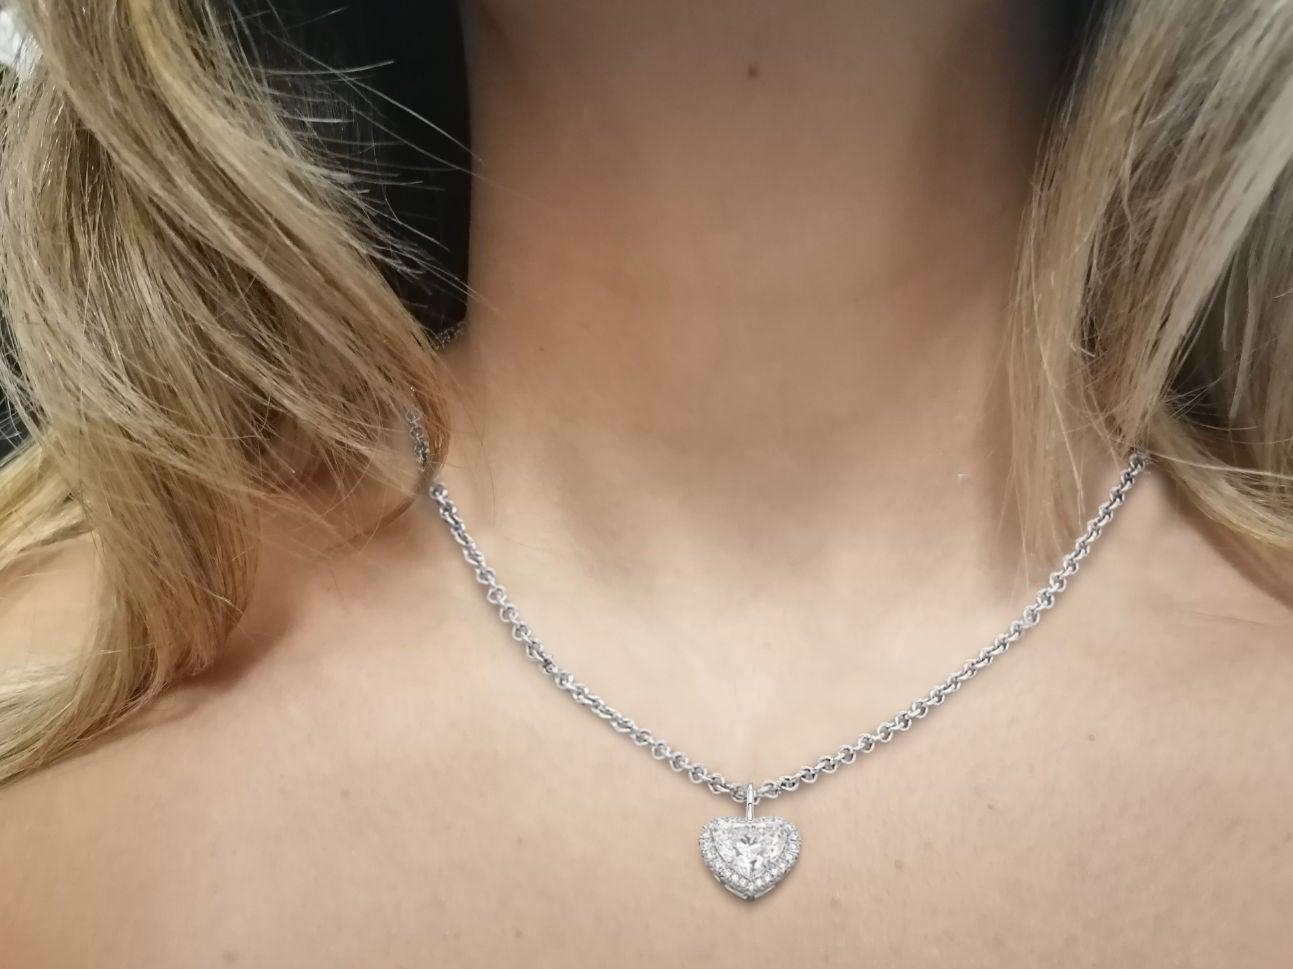 Step into a world of unparalleled beauty with our GIA Certified Heart-shaped Diamond Pendant—a symbol of everlasting love and sophistication. This exquisite pendant boasts a mesmerizing 7-carat diamond, graded with the rare and stunning D color,